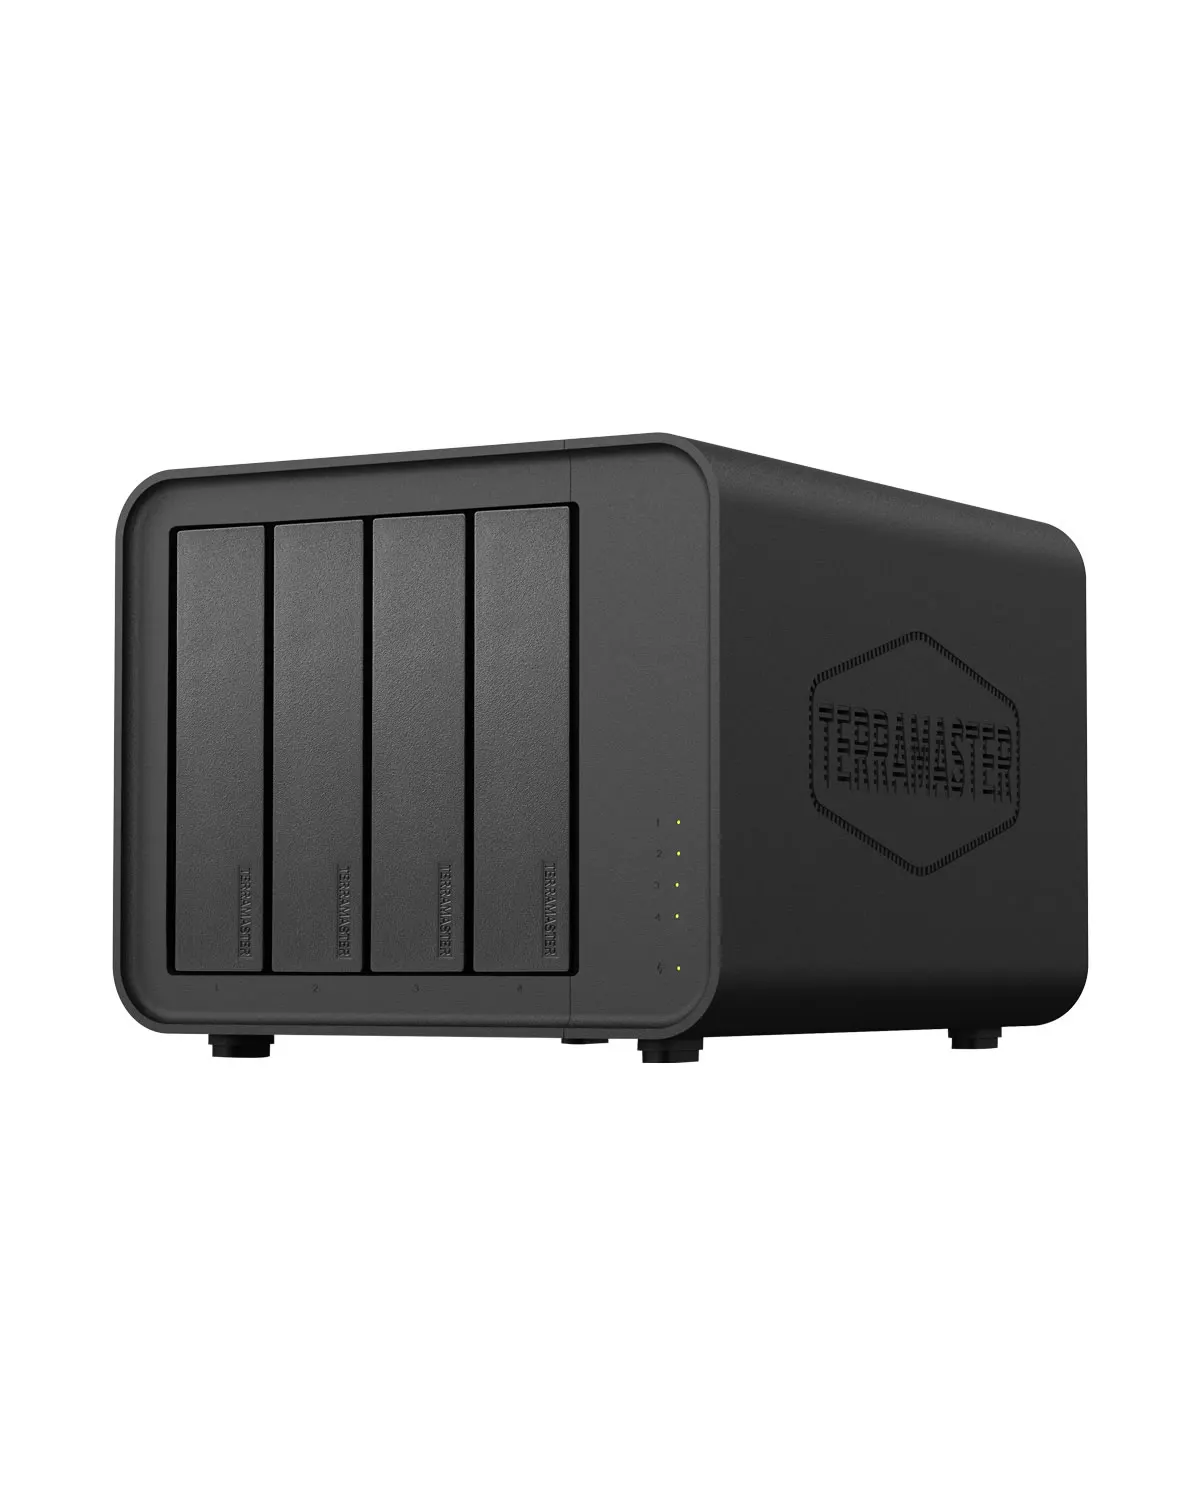 TERRAMASTER F4-212 4 Bay NAS - Quad Core CPU, 2GB DDR4 RAM, Network Attached Storage Personal Cloud (Diskless)